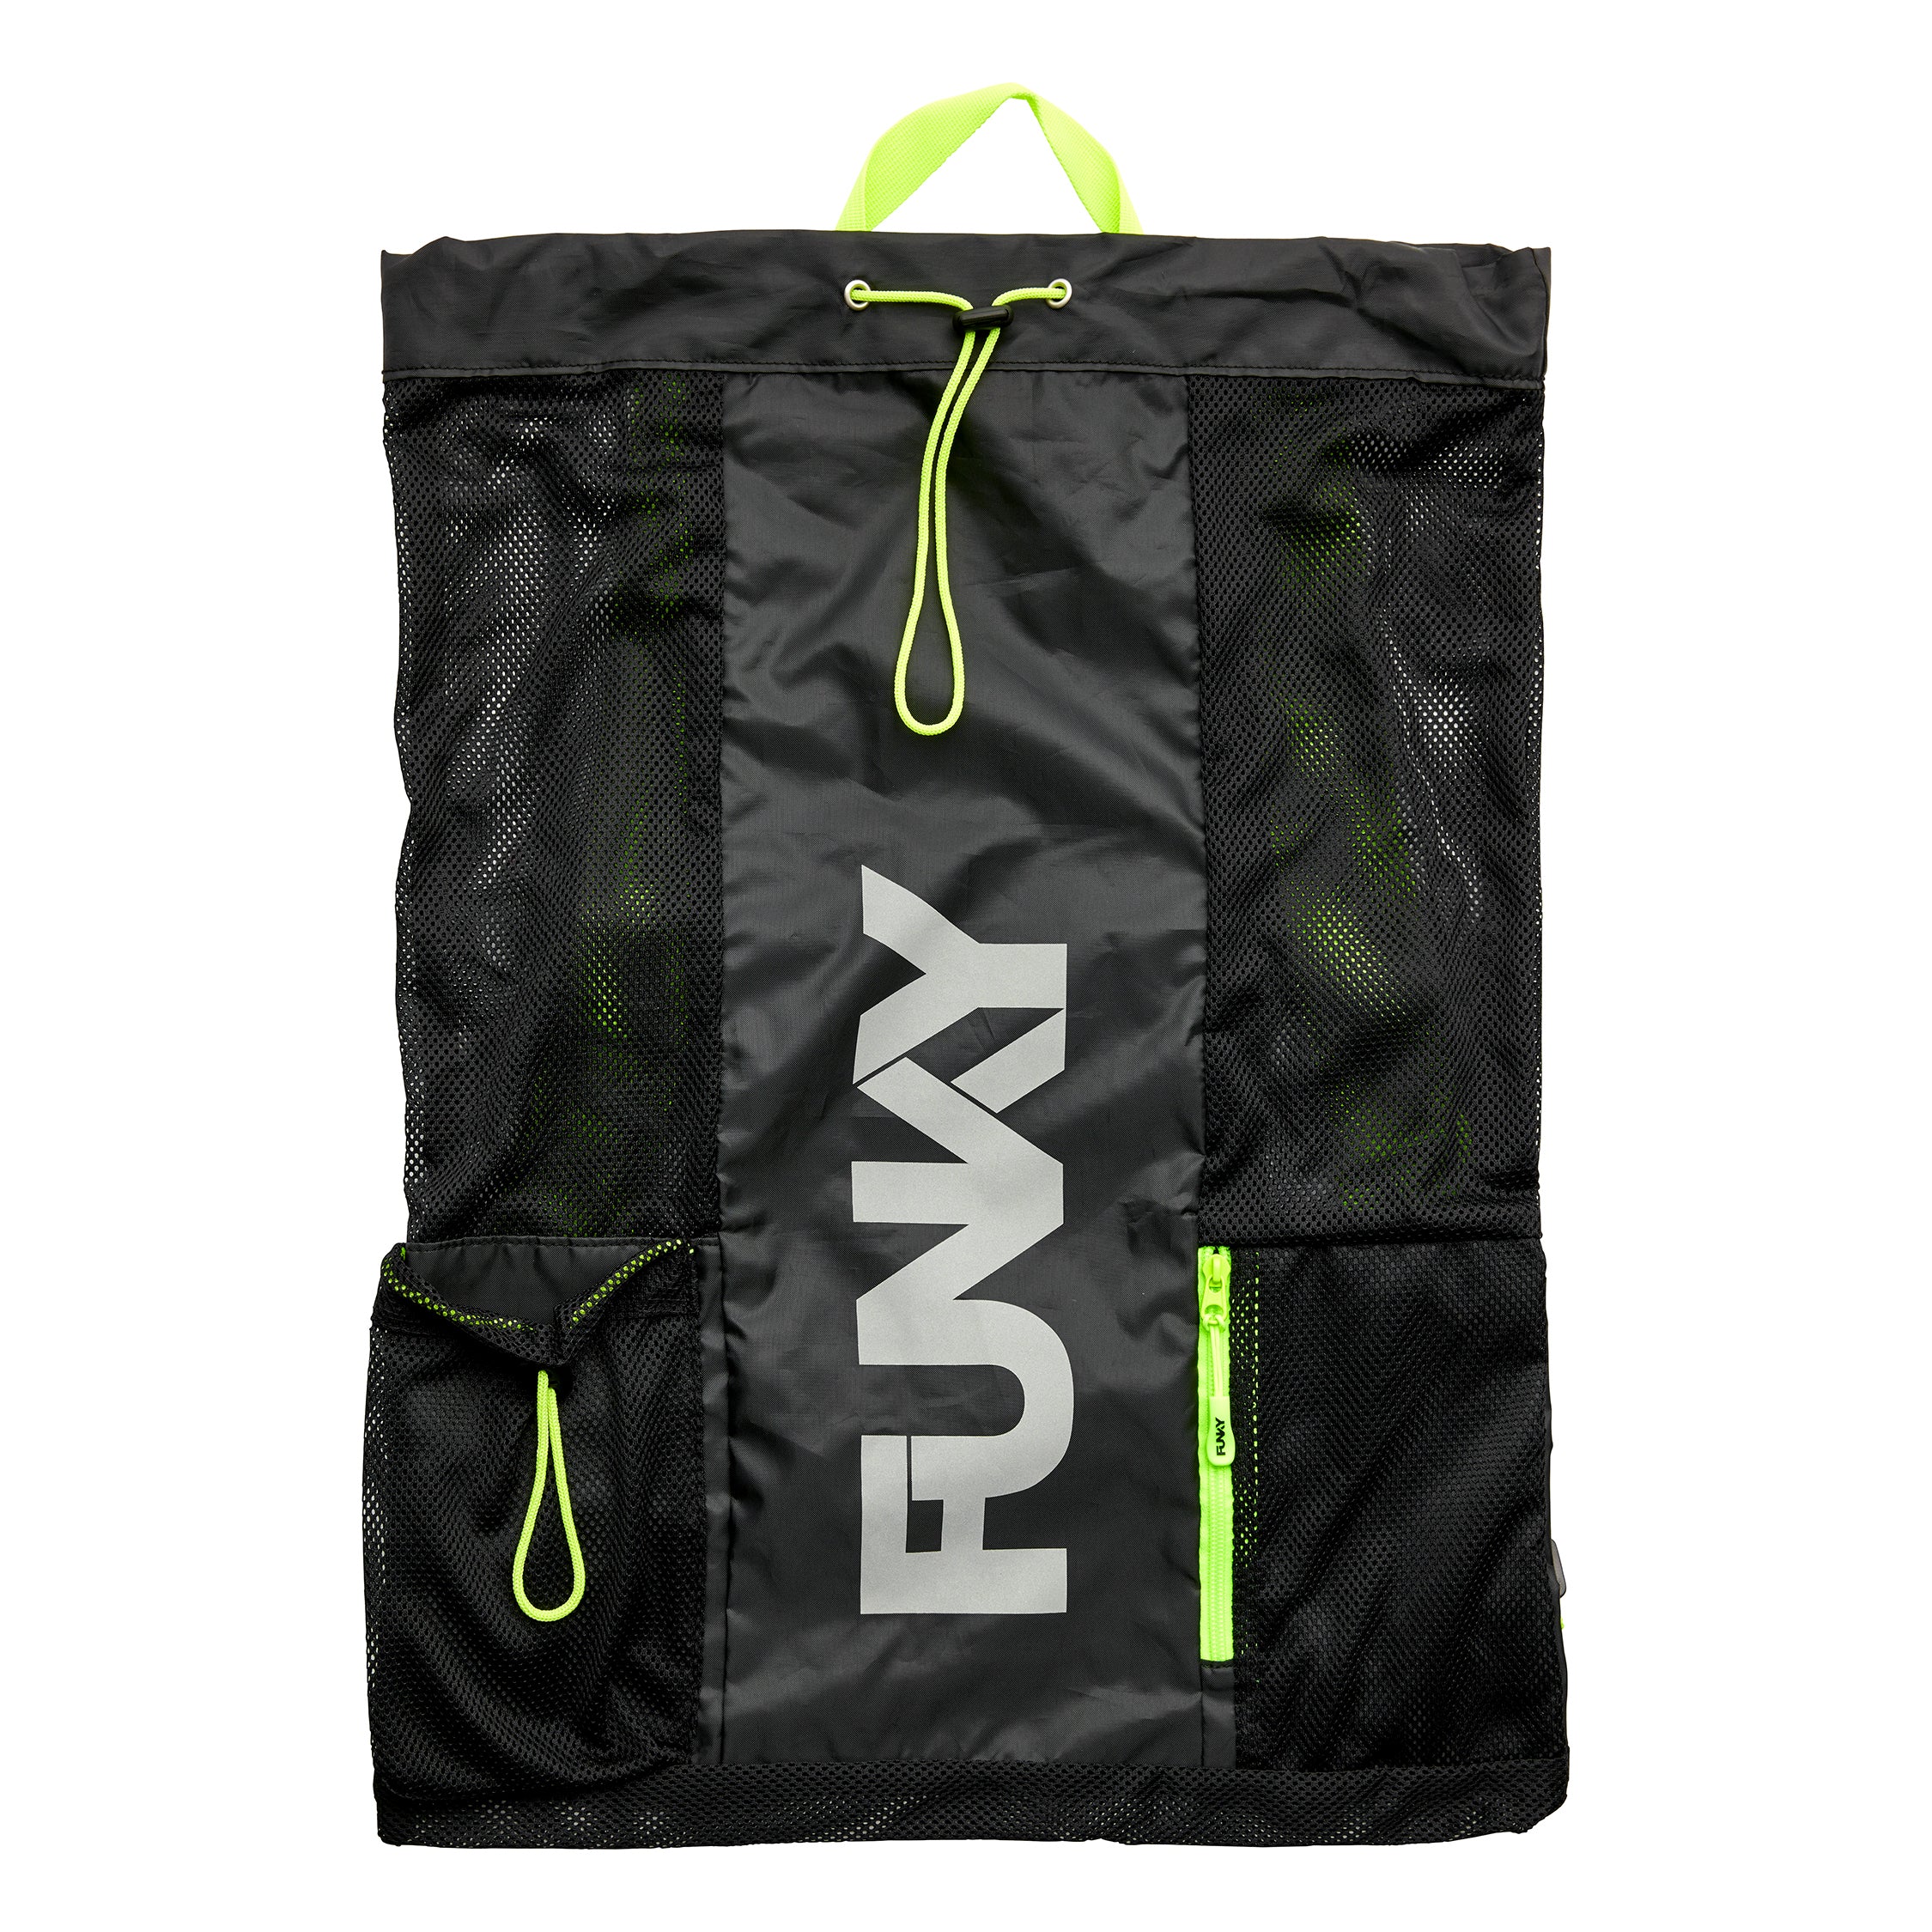 Gear Up Mesh Backpack